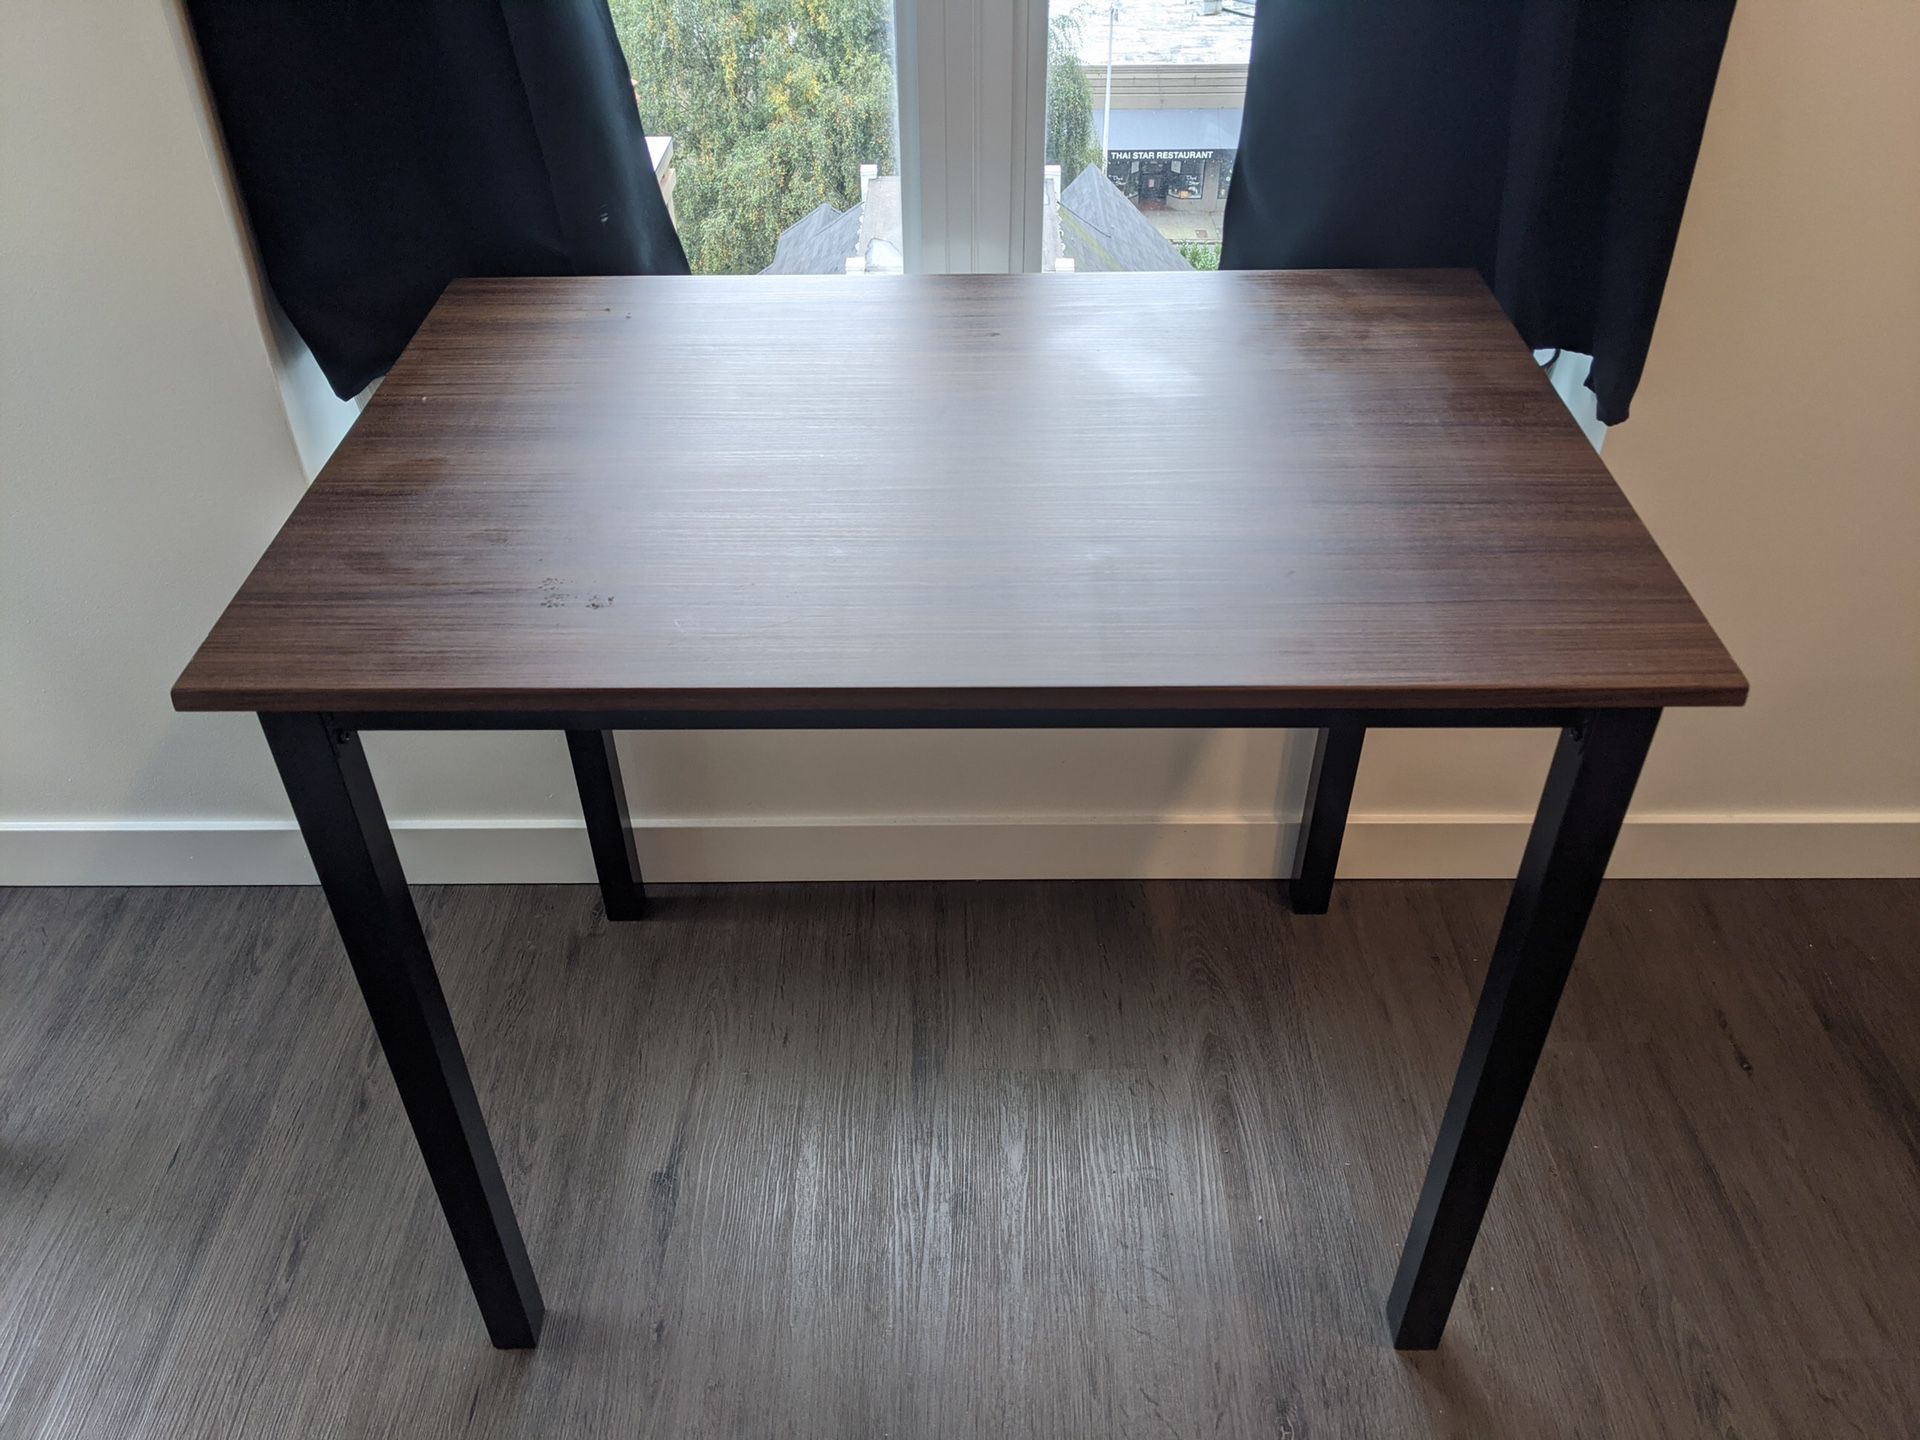 Small dining/kitchen table